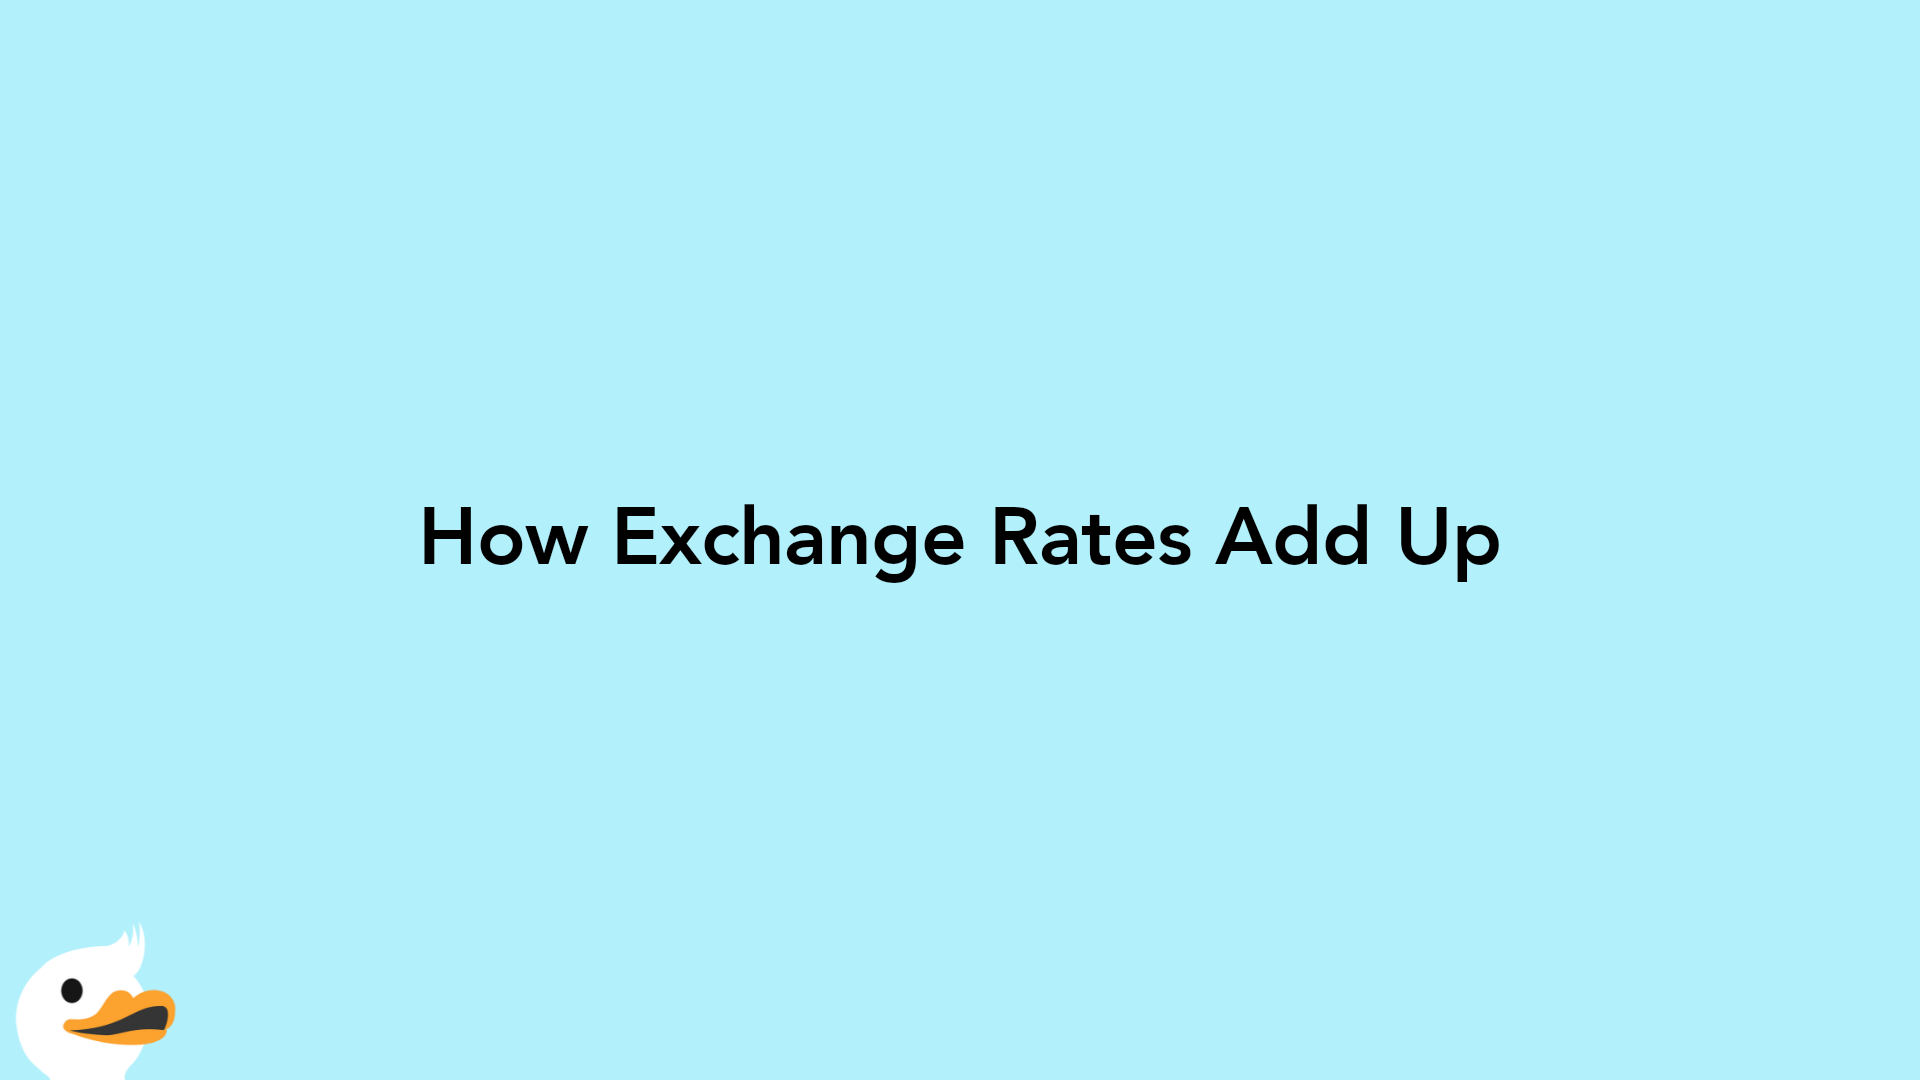 How Exchange Rates Add Up